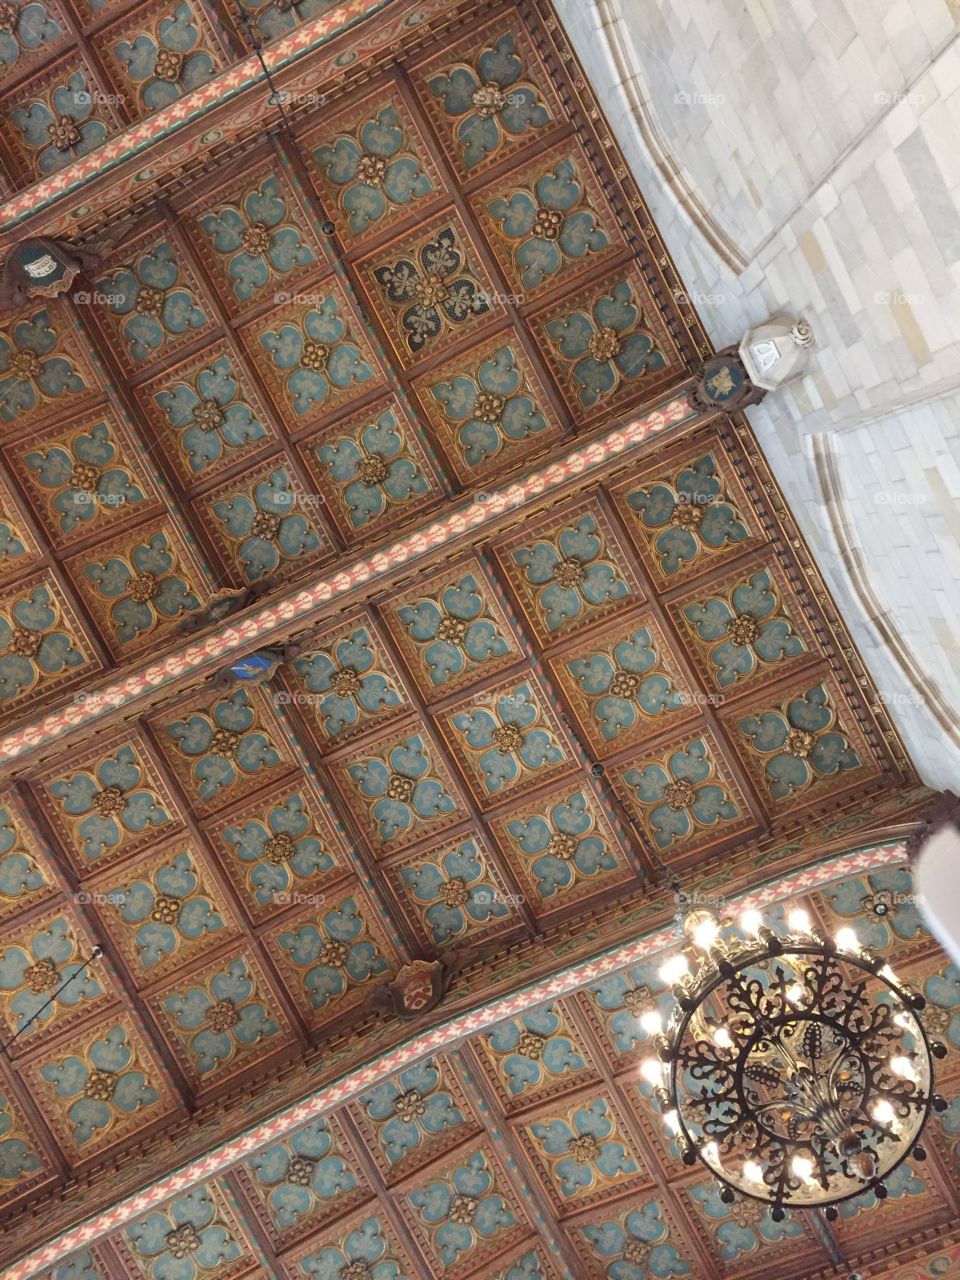 Ceiling of Cook Legal Research Library @ University of Michigan Law School